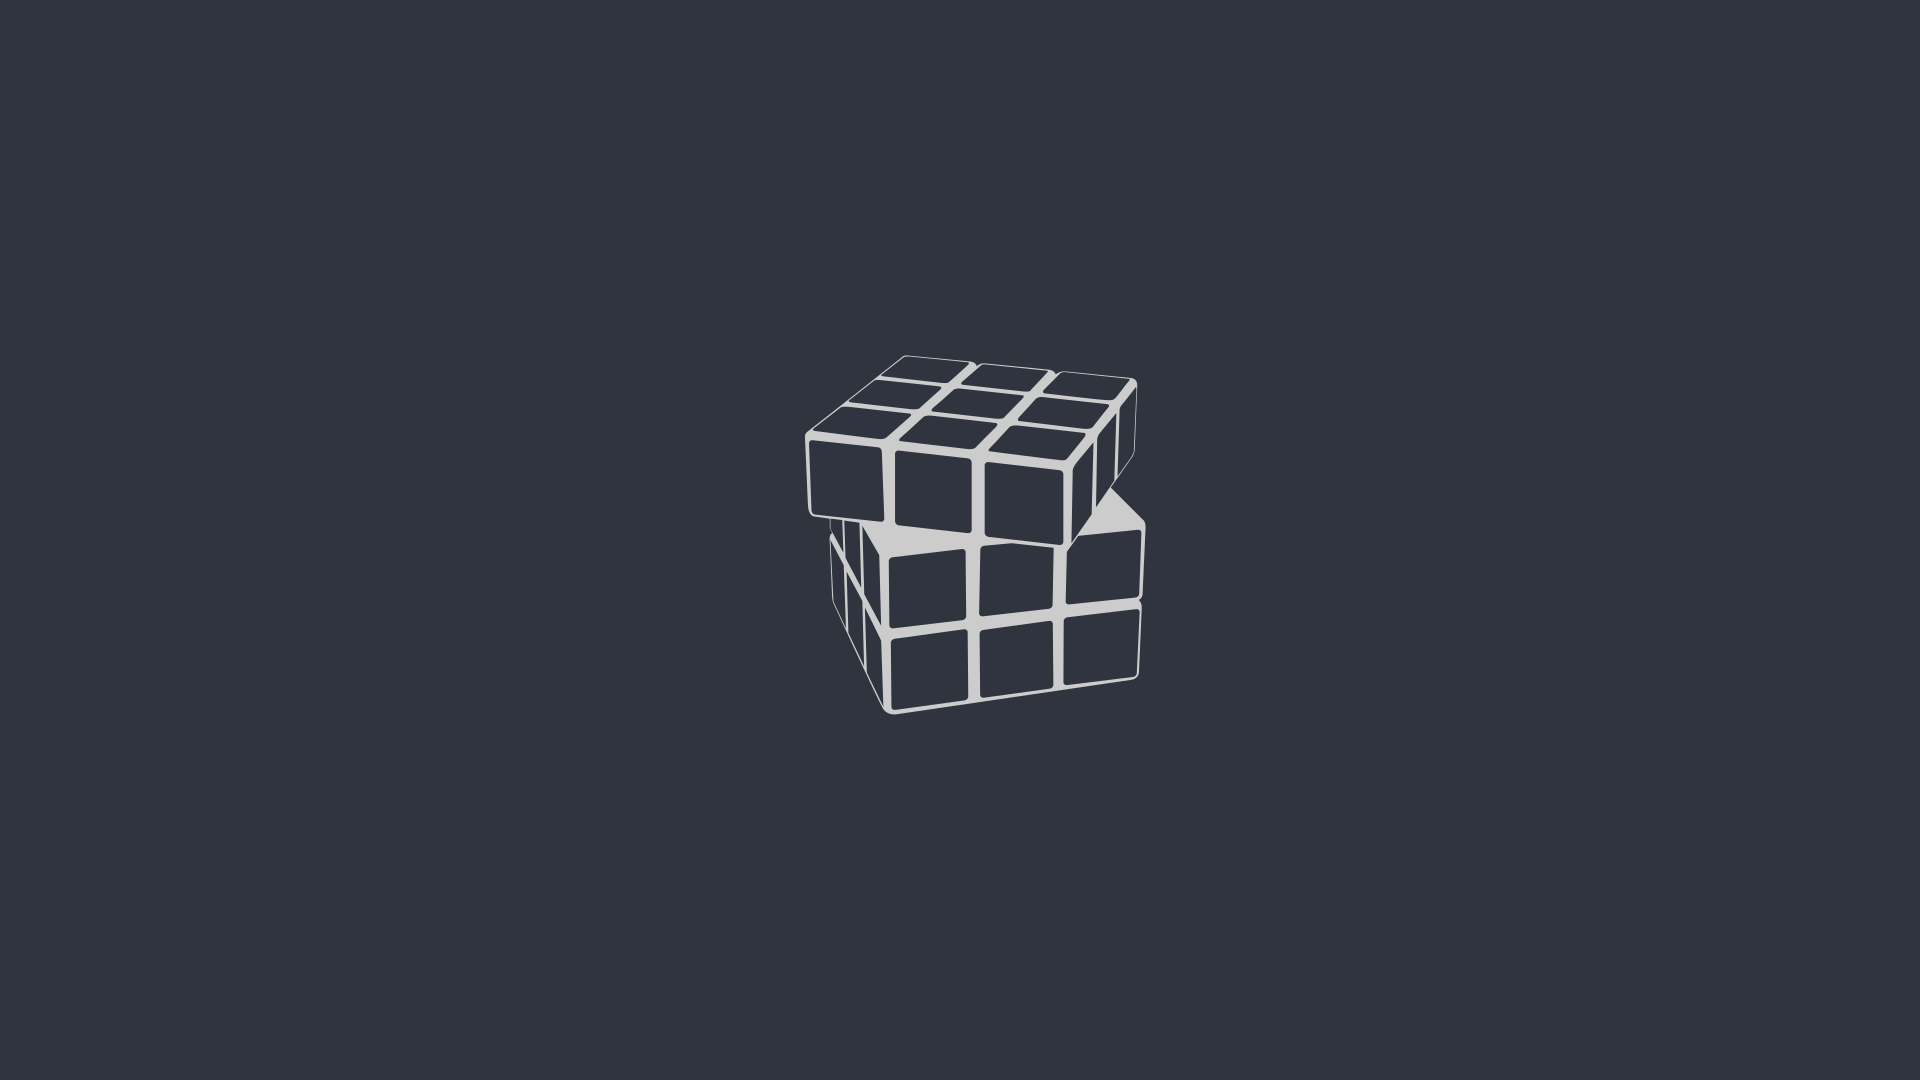 General 1920x1080 Rubik's Cube minimalism digital art gray gray background CGI abstract 3D Abstract simple background 3D Blocks